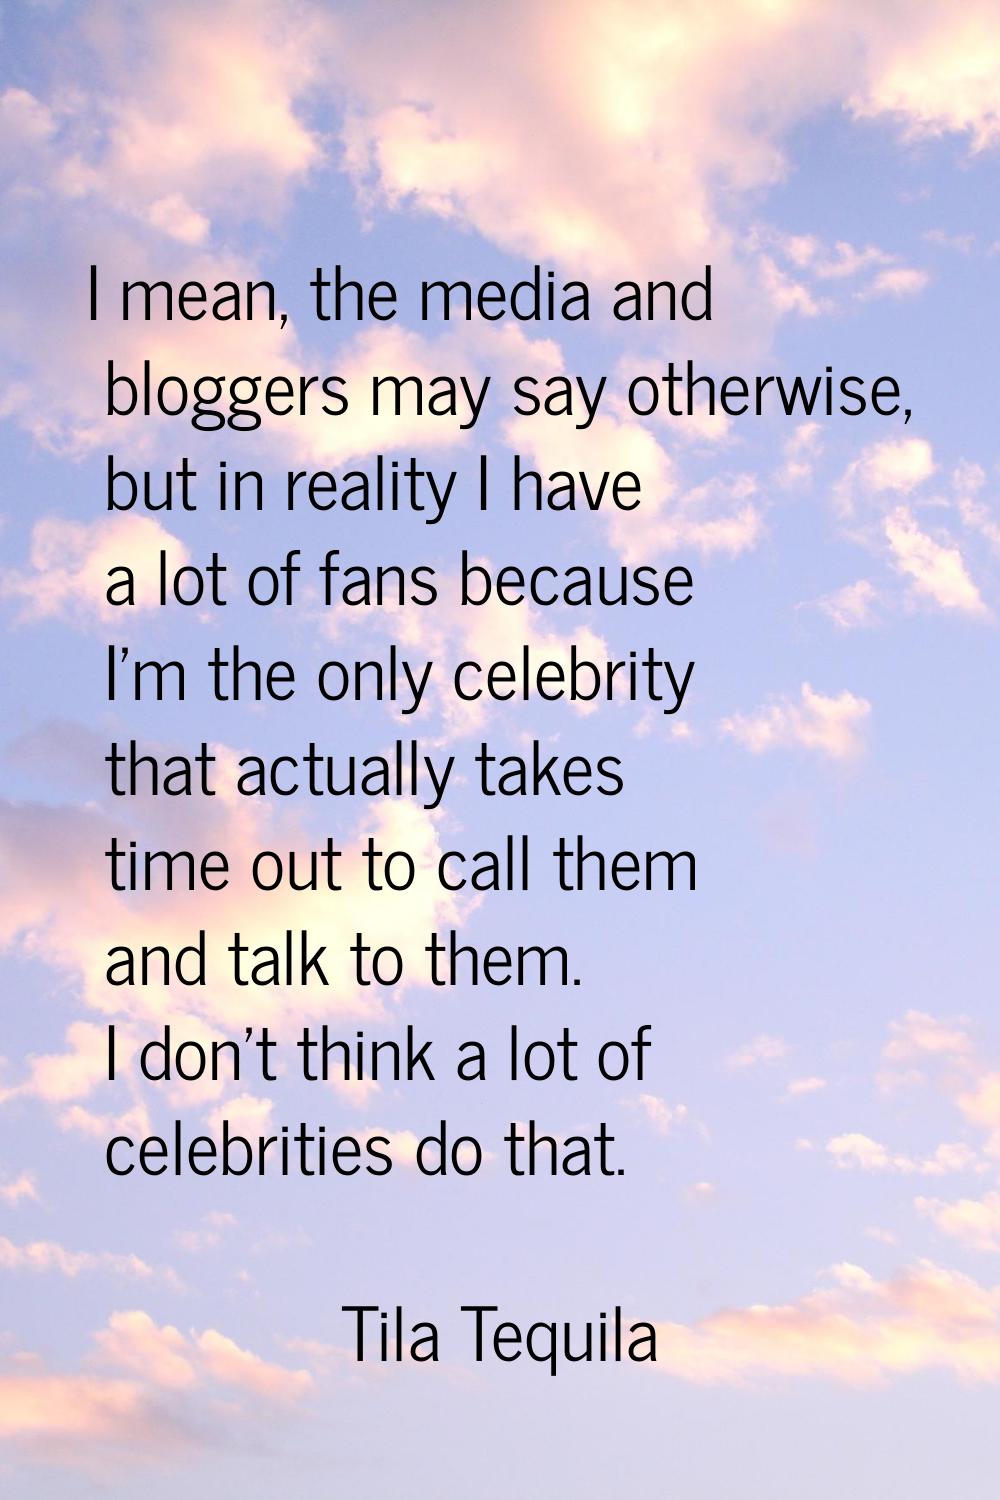 I mean, the media and bloggers may say otherwise, but in reality I have a lot of fans because I'm t